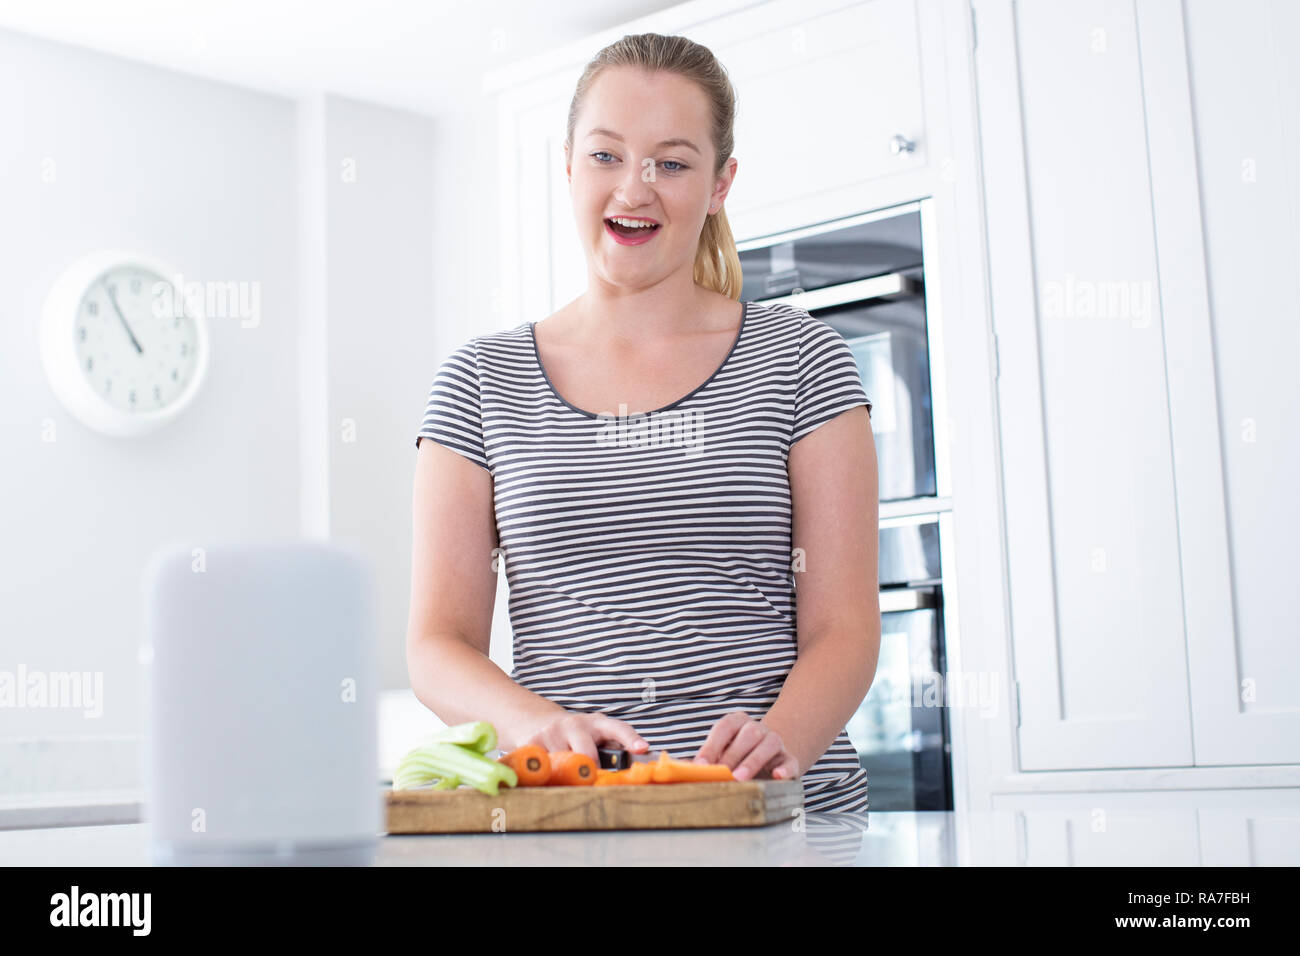 Woman Preparing Food At Home Asking Digital Assistant Question Stock Photo